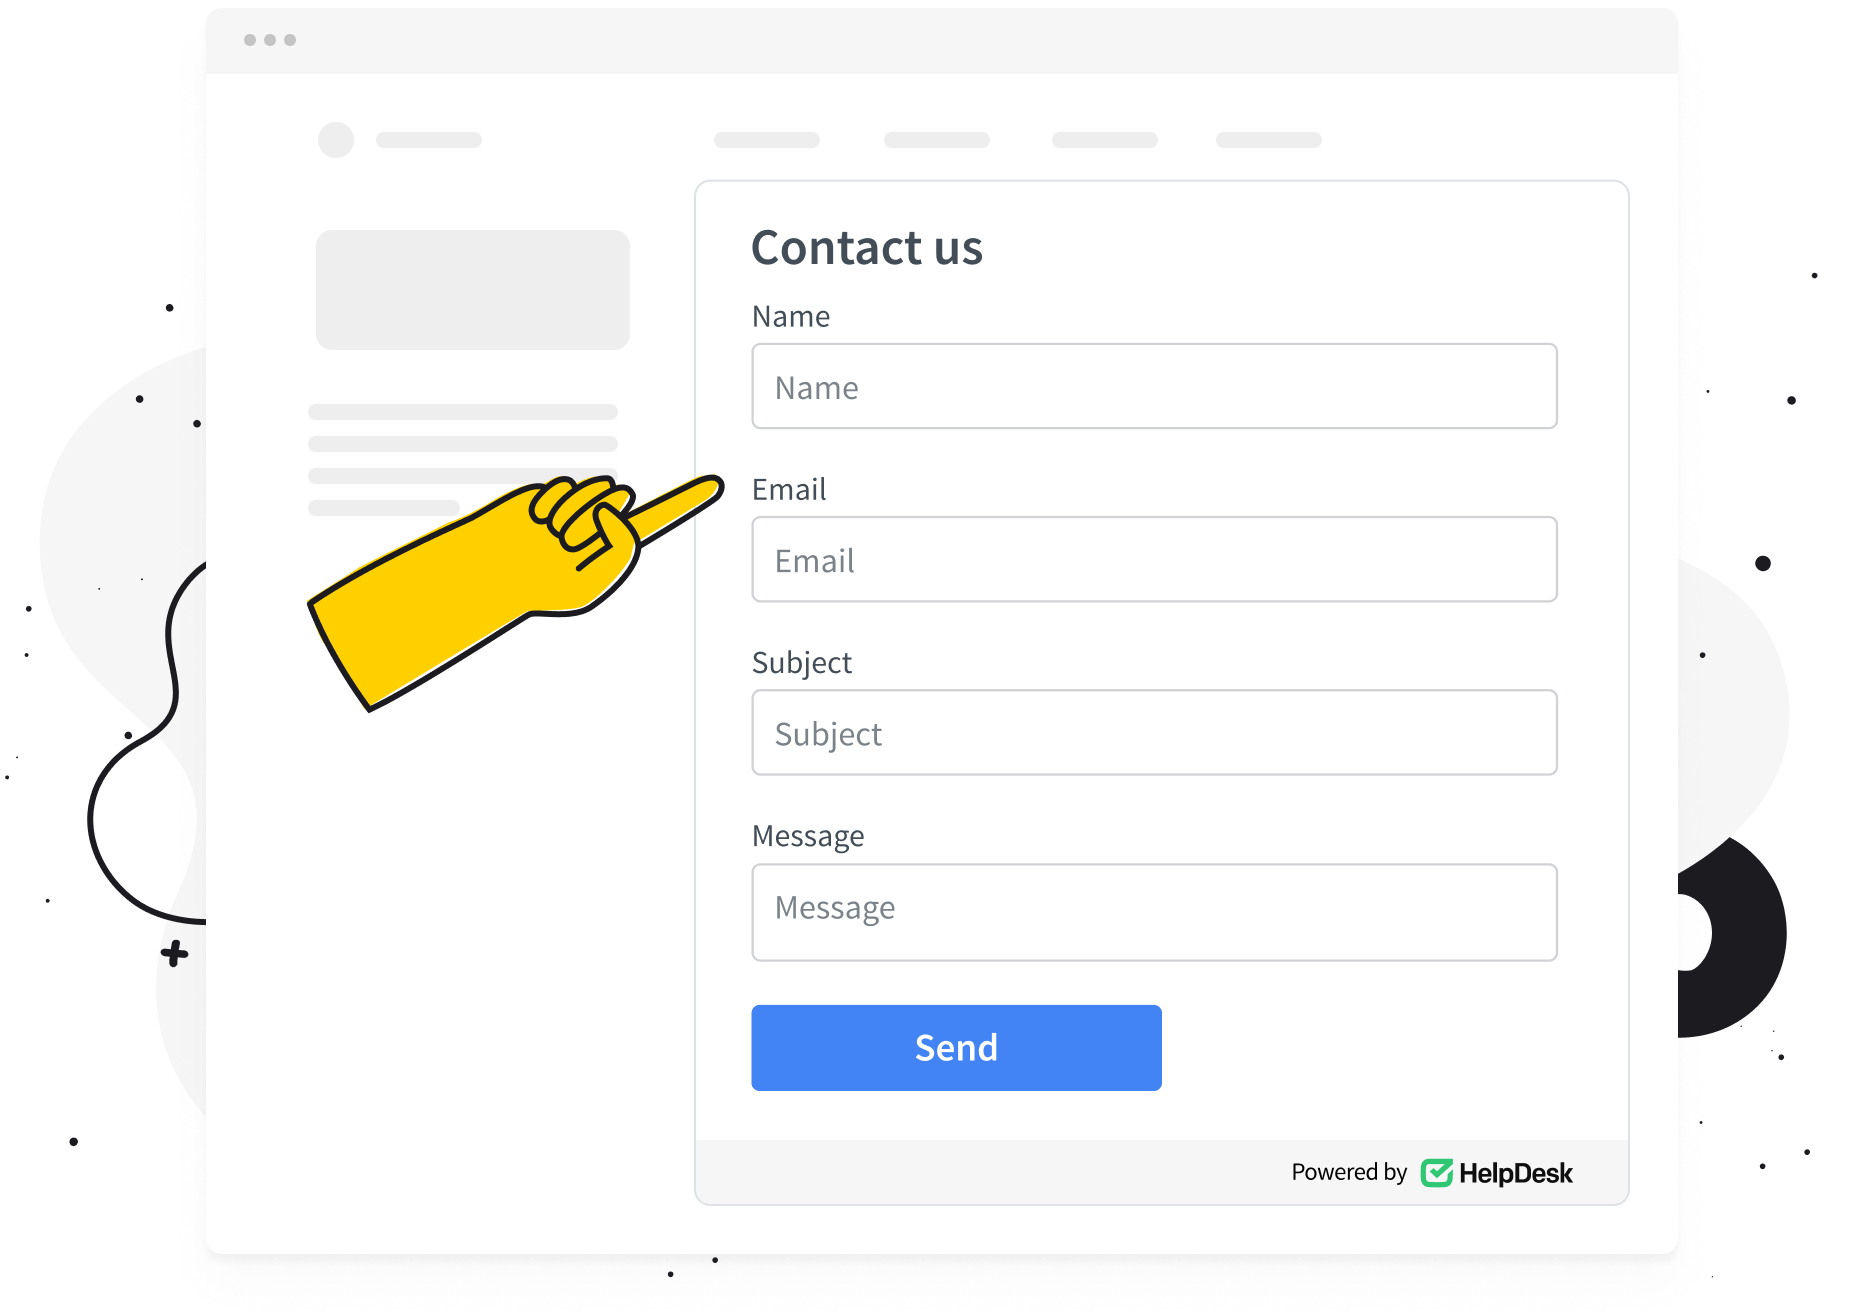 Customizing contact form in HelpDesk app